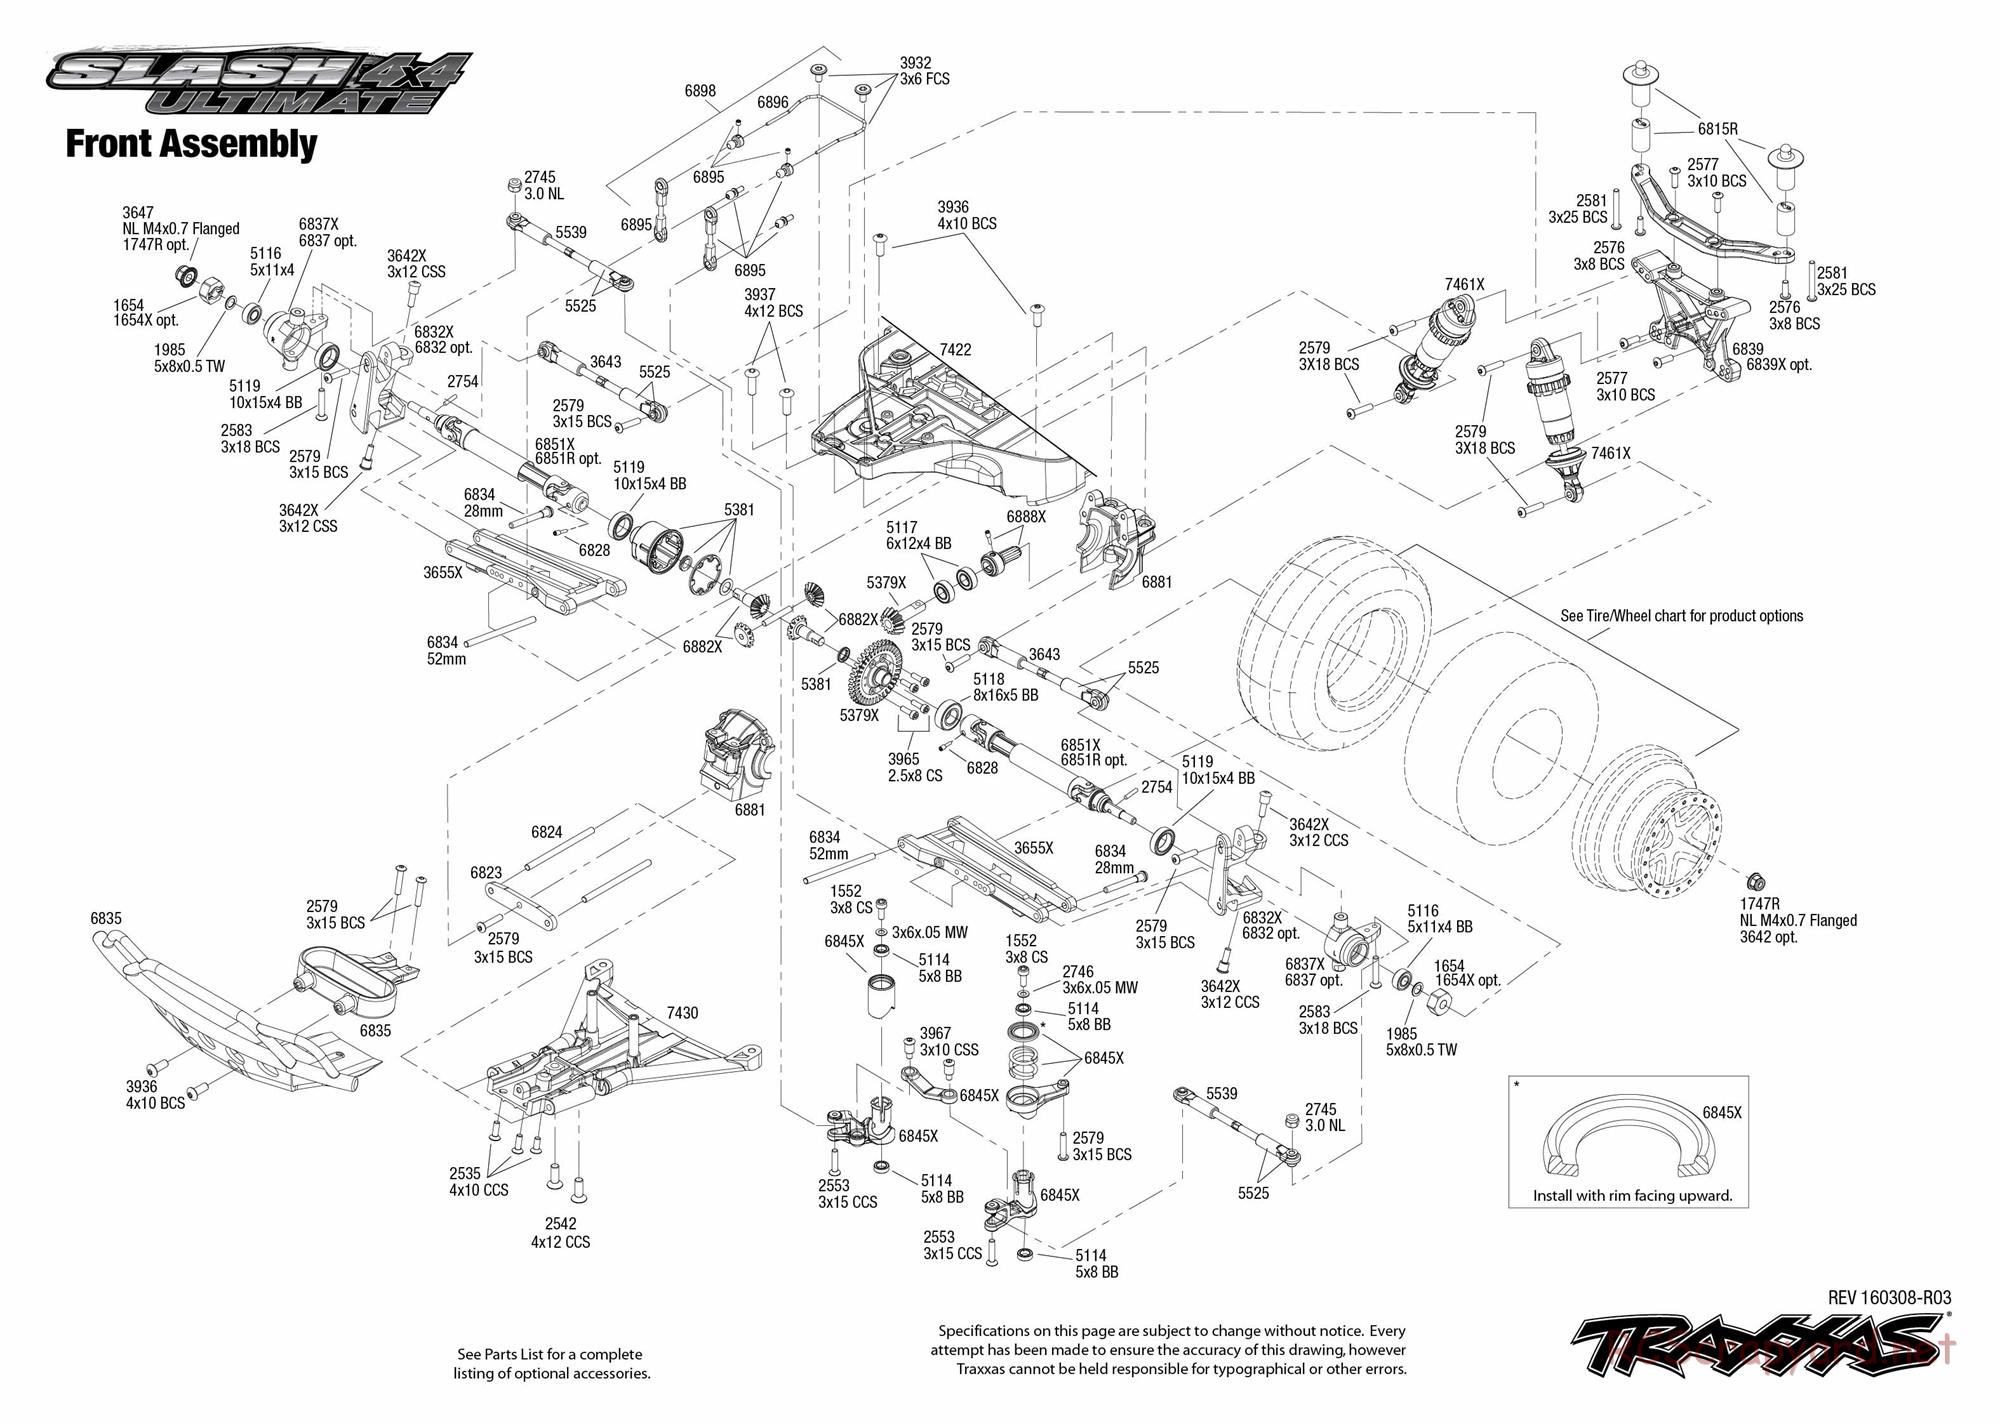 Traxxas - Slash 4x4 Ultimate (2015) - Exploded Views - Page 2